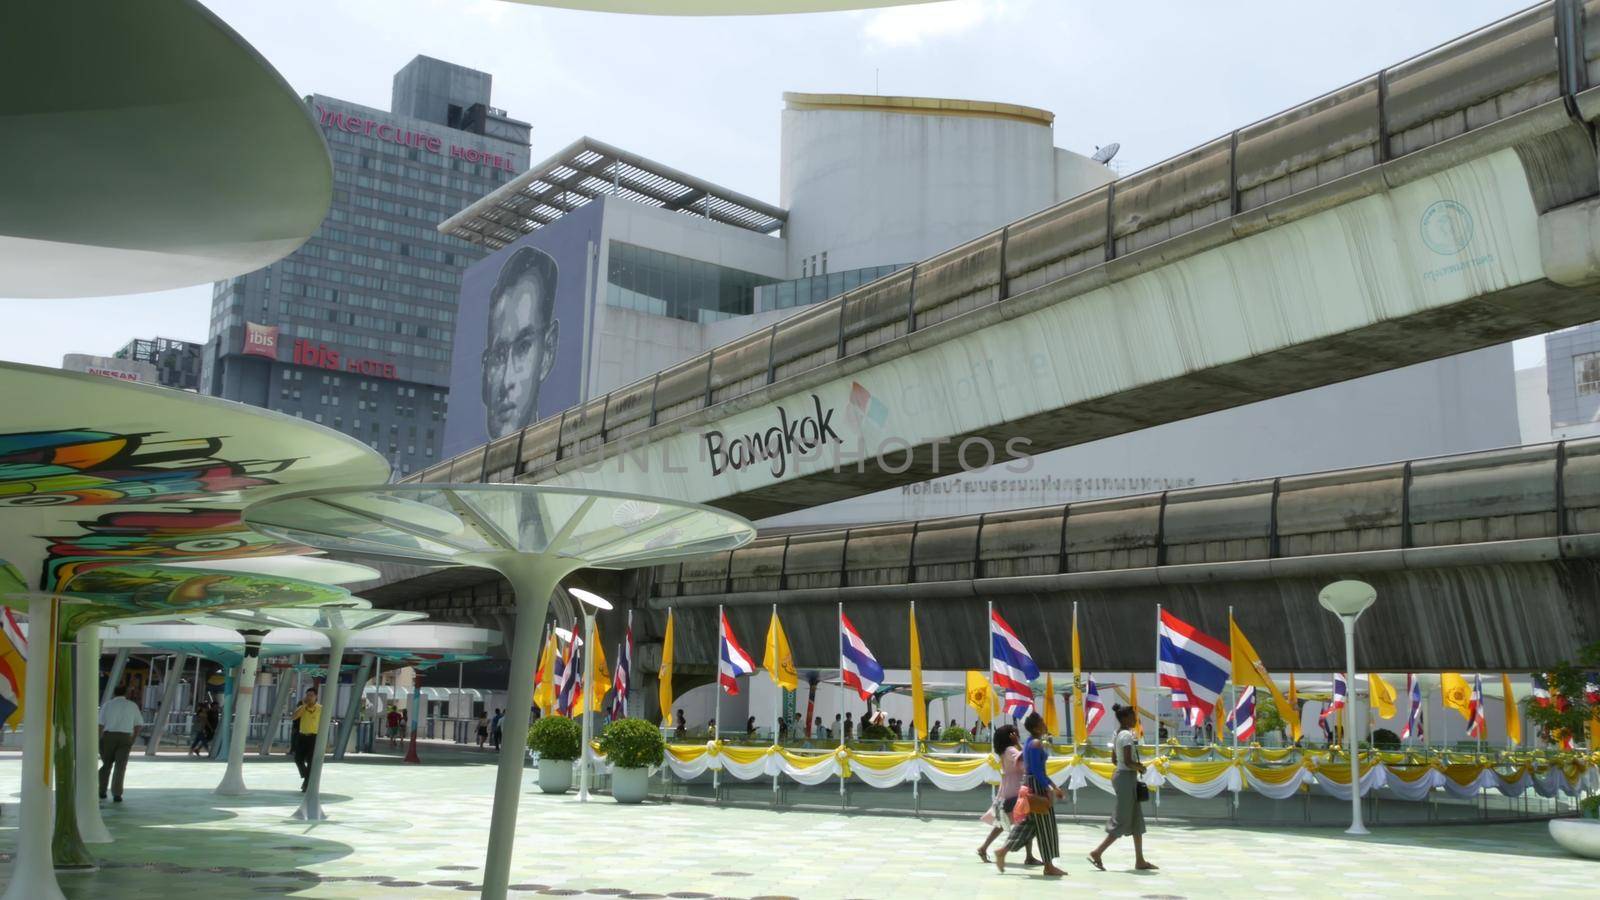 BANGKOK, THAILAND - 11 JULY, 2019: Pedestrians walking on the bridge near MBK and Siam Square under BTS train line. People in festive modern city decorated with waving national flags and royal symbol by DogoraSun